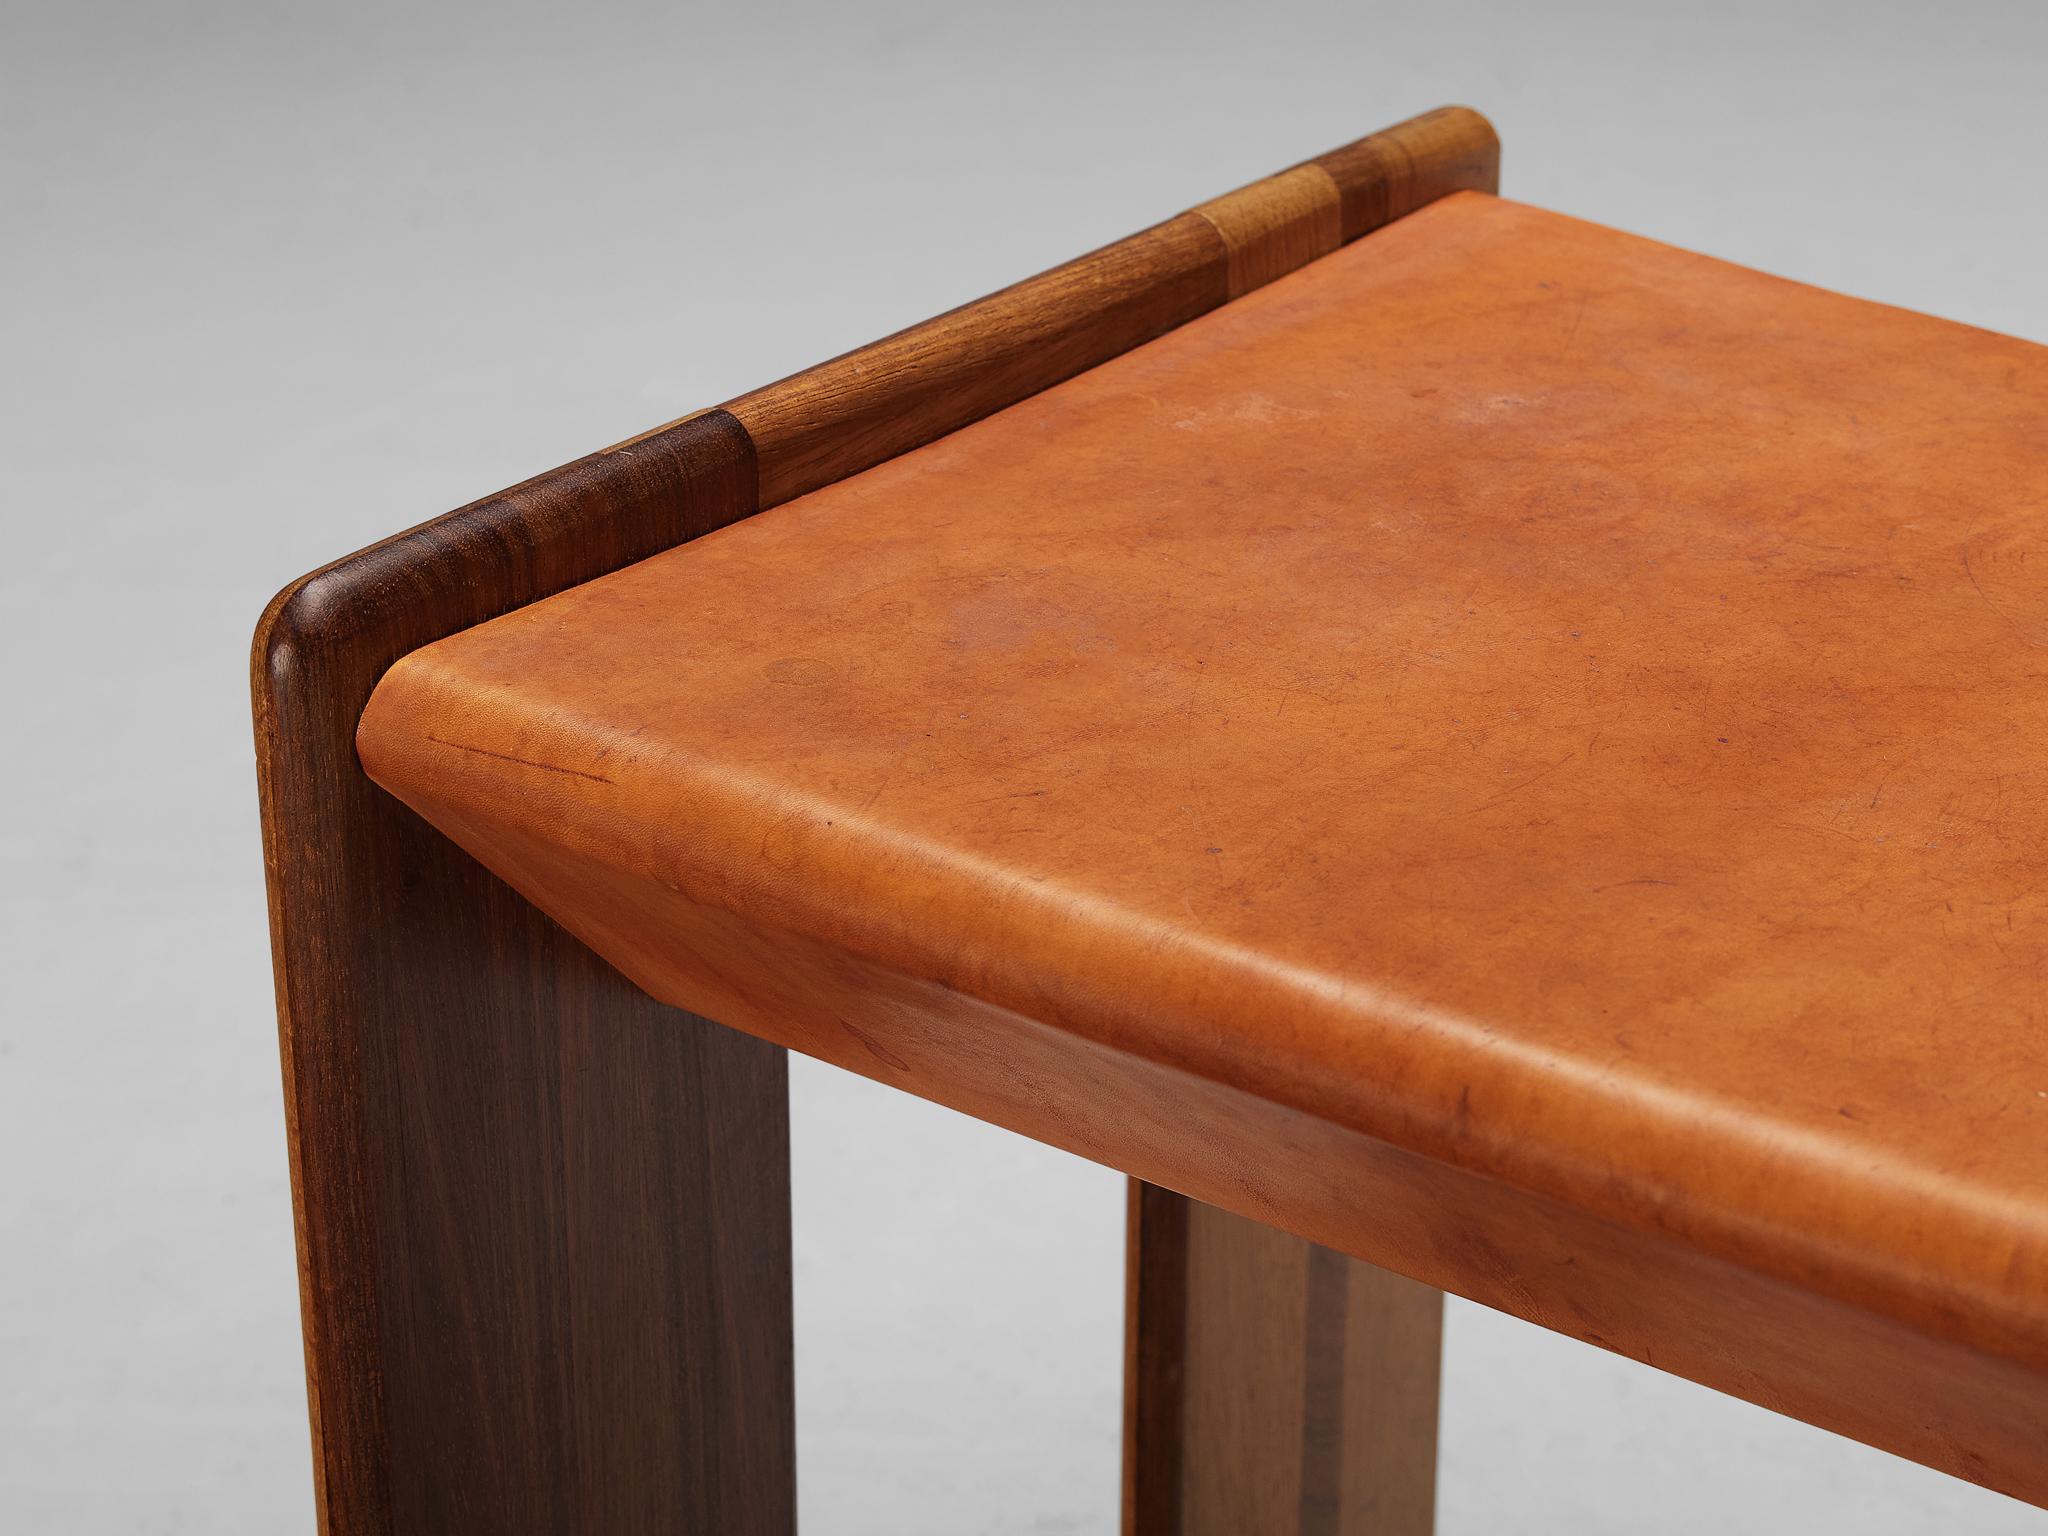 Italian Afra & Tobia Scarpa 'Benetton' Stools in Mixed Wood and Cognac Leather For Sale